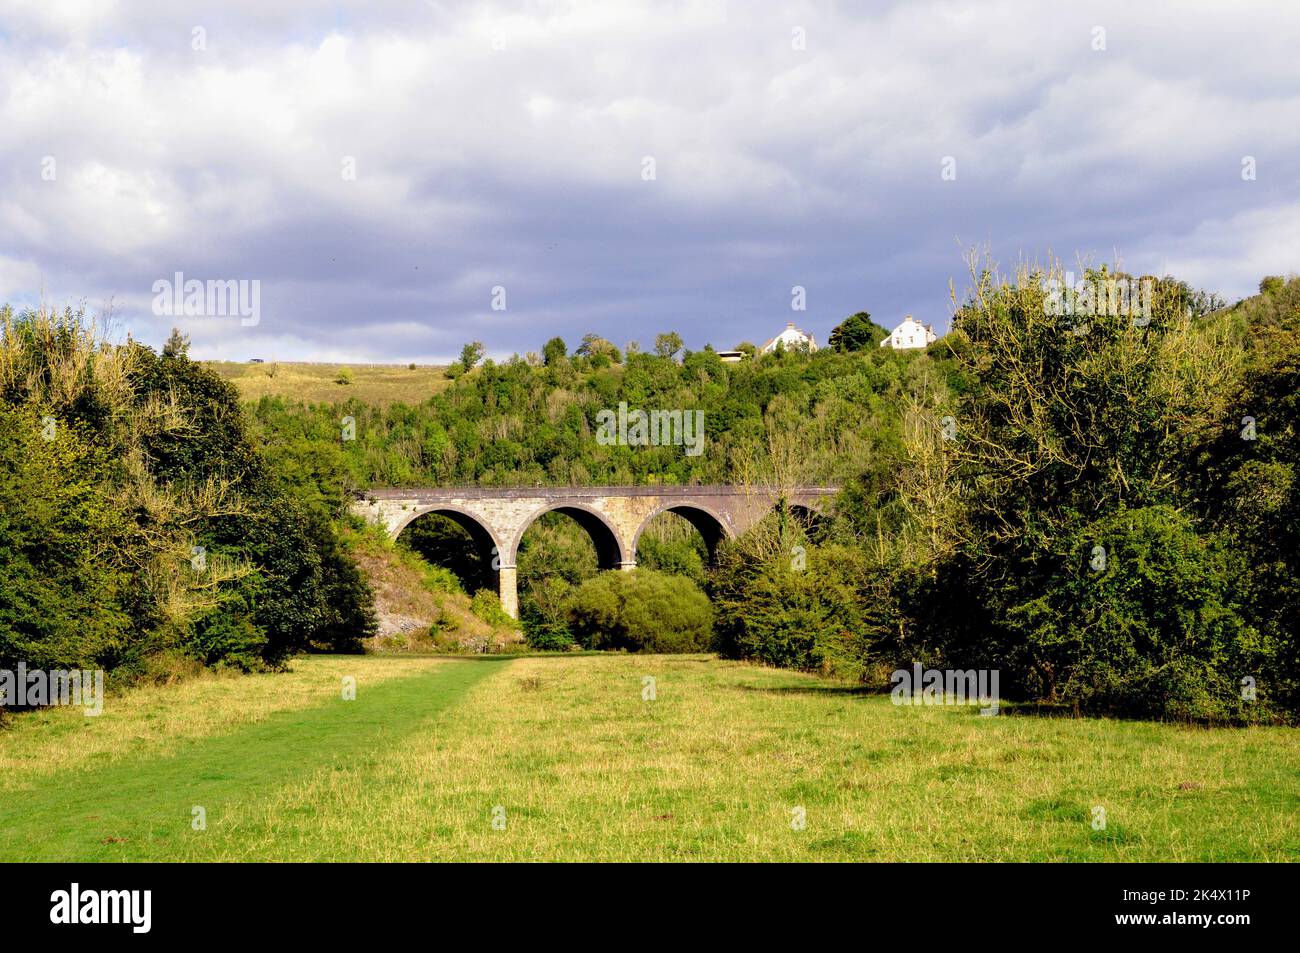 The Headstone Viaduct near Monsal Head. The viaduct is now a multi-use trail, its five arches spanning the River Wye. It is grade 2 listed structure. Stock Photo